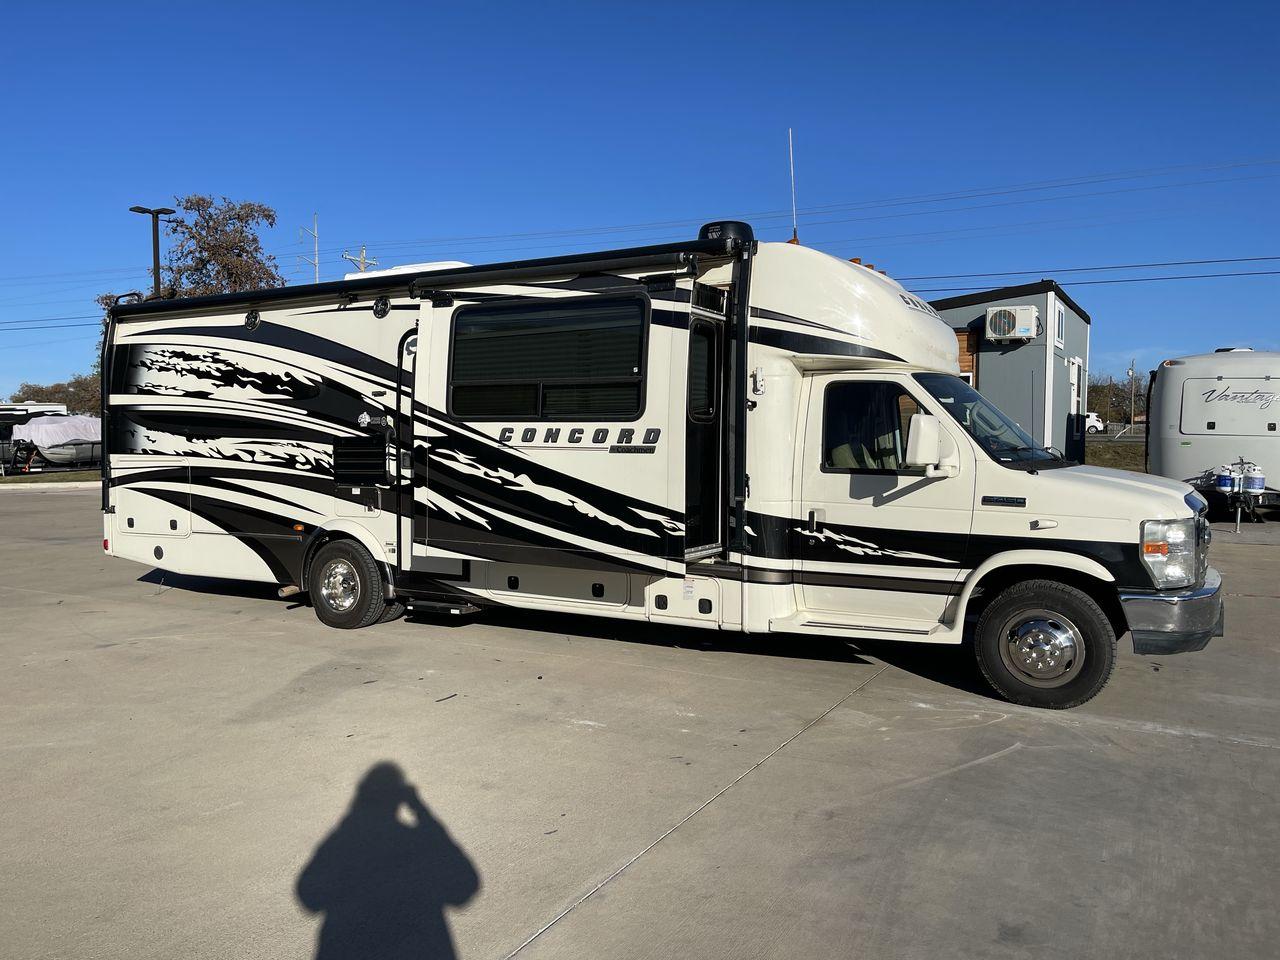 2011 WHITE COACHMEN CONCORD 300TS (1FDEX4FS9BD) , Length: 30.83 ft. | Dry Weight: 12,110 lbs. | Gross Weight: 14,500 lbs. | Slides: 3 transmission, located at 4319 N Main St, Cleburne, TX, 76033, (817) 678-5133, 32.385960, -97.391212 - The 2011 Coachmen Concord 300TS, a class C motorhome that redefines travel comfort and convenience. With a length of 31 feet, this well-maintained model is built on a Ford E450 chassis, powered by a dependable Triton V10 engine, ensuring a smooth and reliable journey. The Concord 300TS features thre - Photo #22